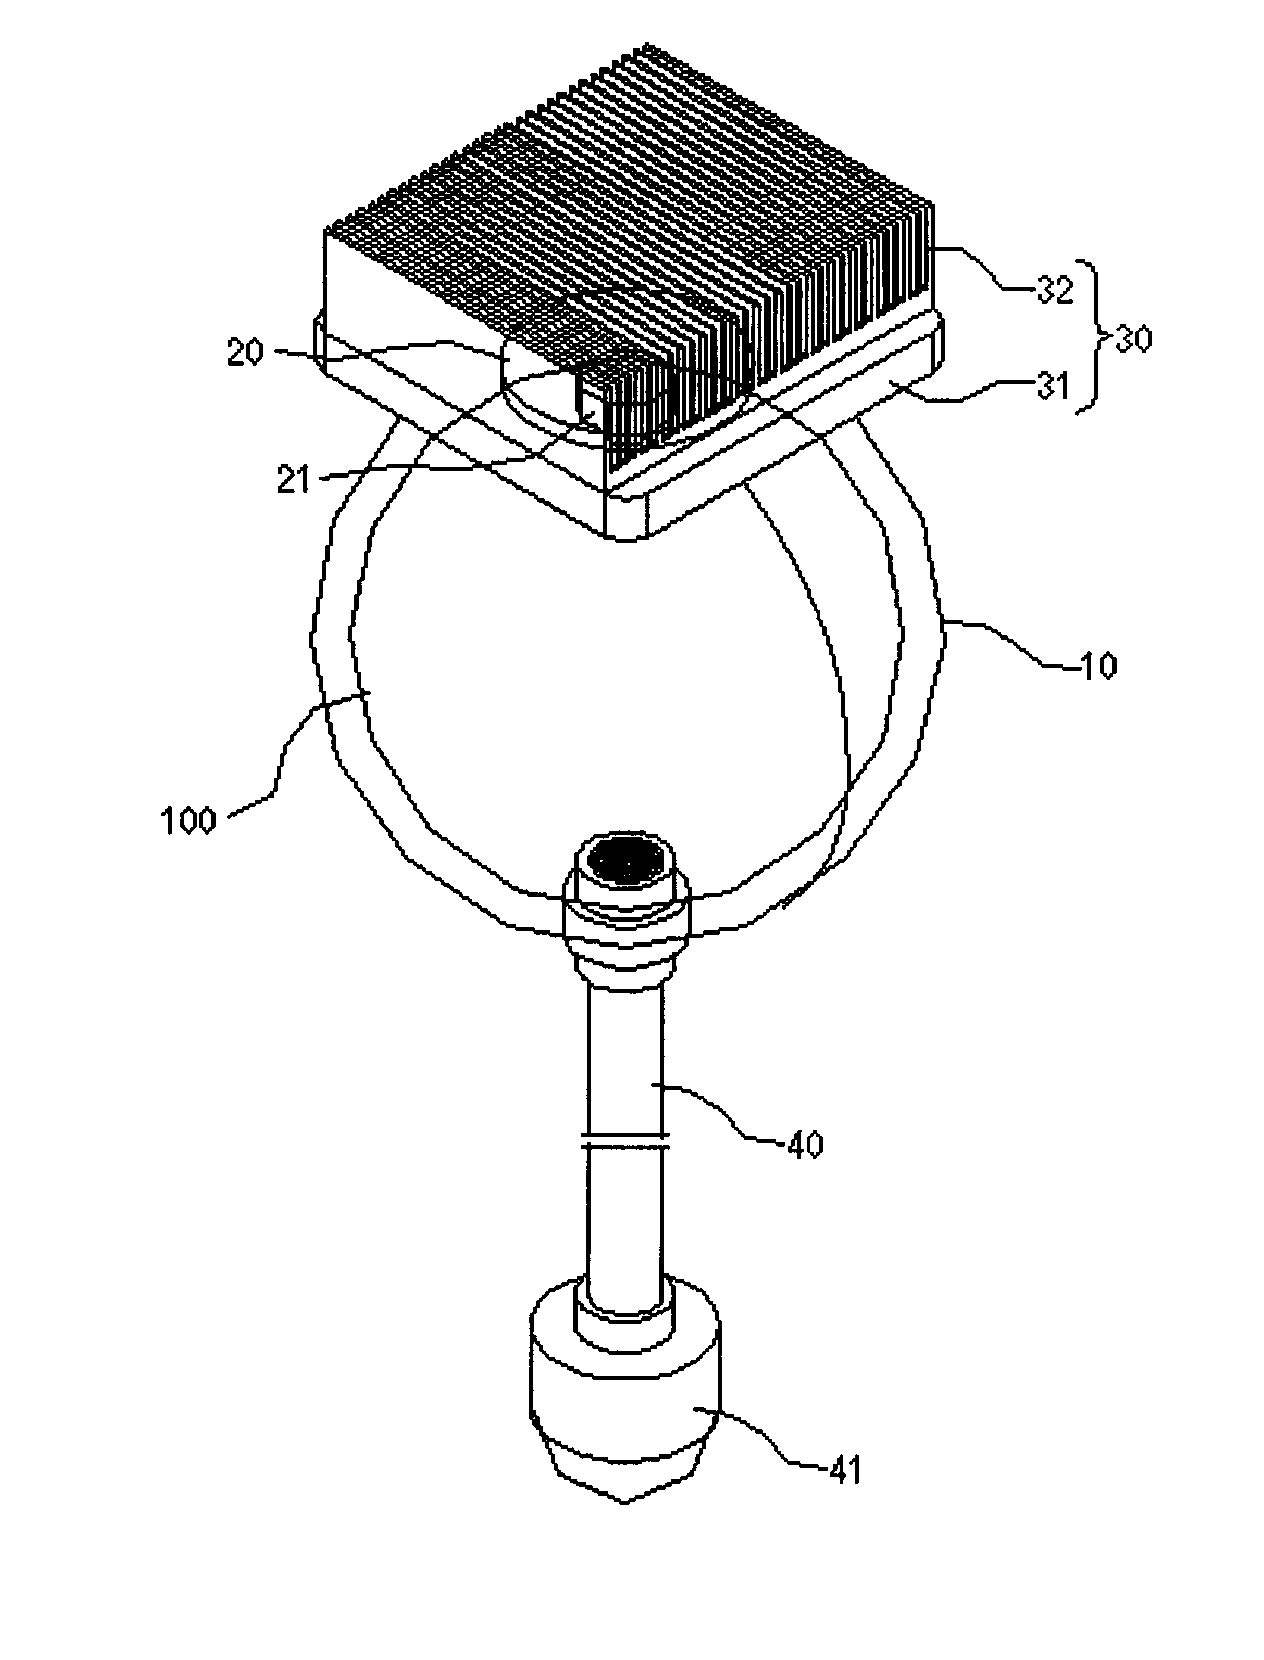 LED (Light Emitting Diode) light guide structure